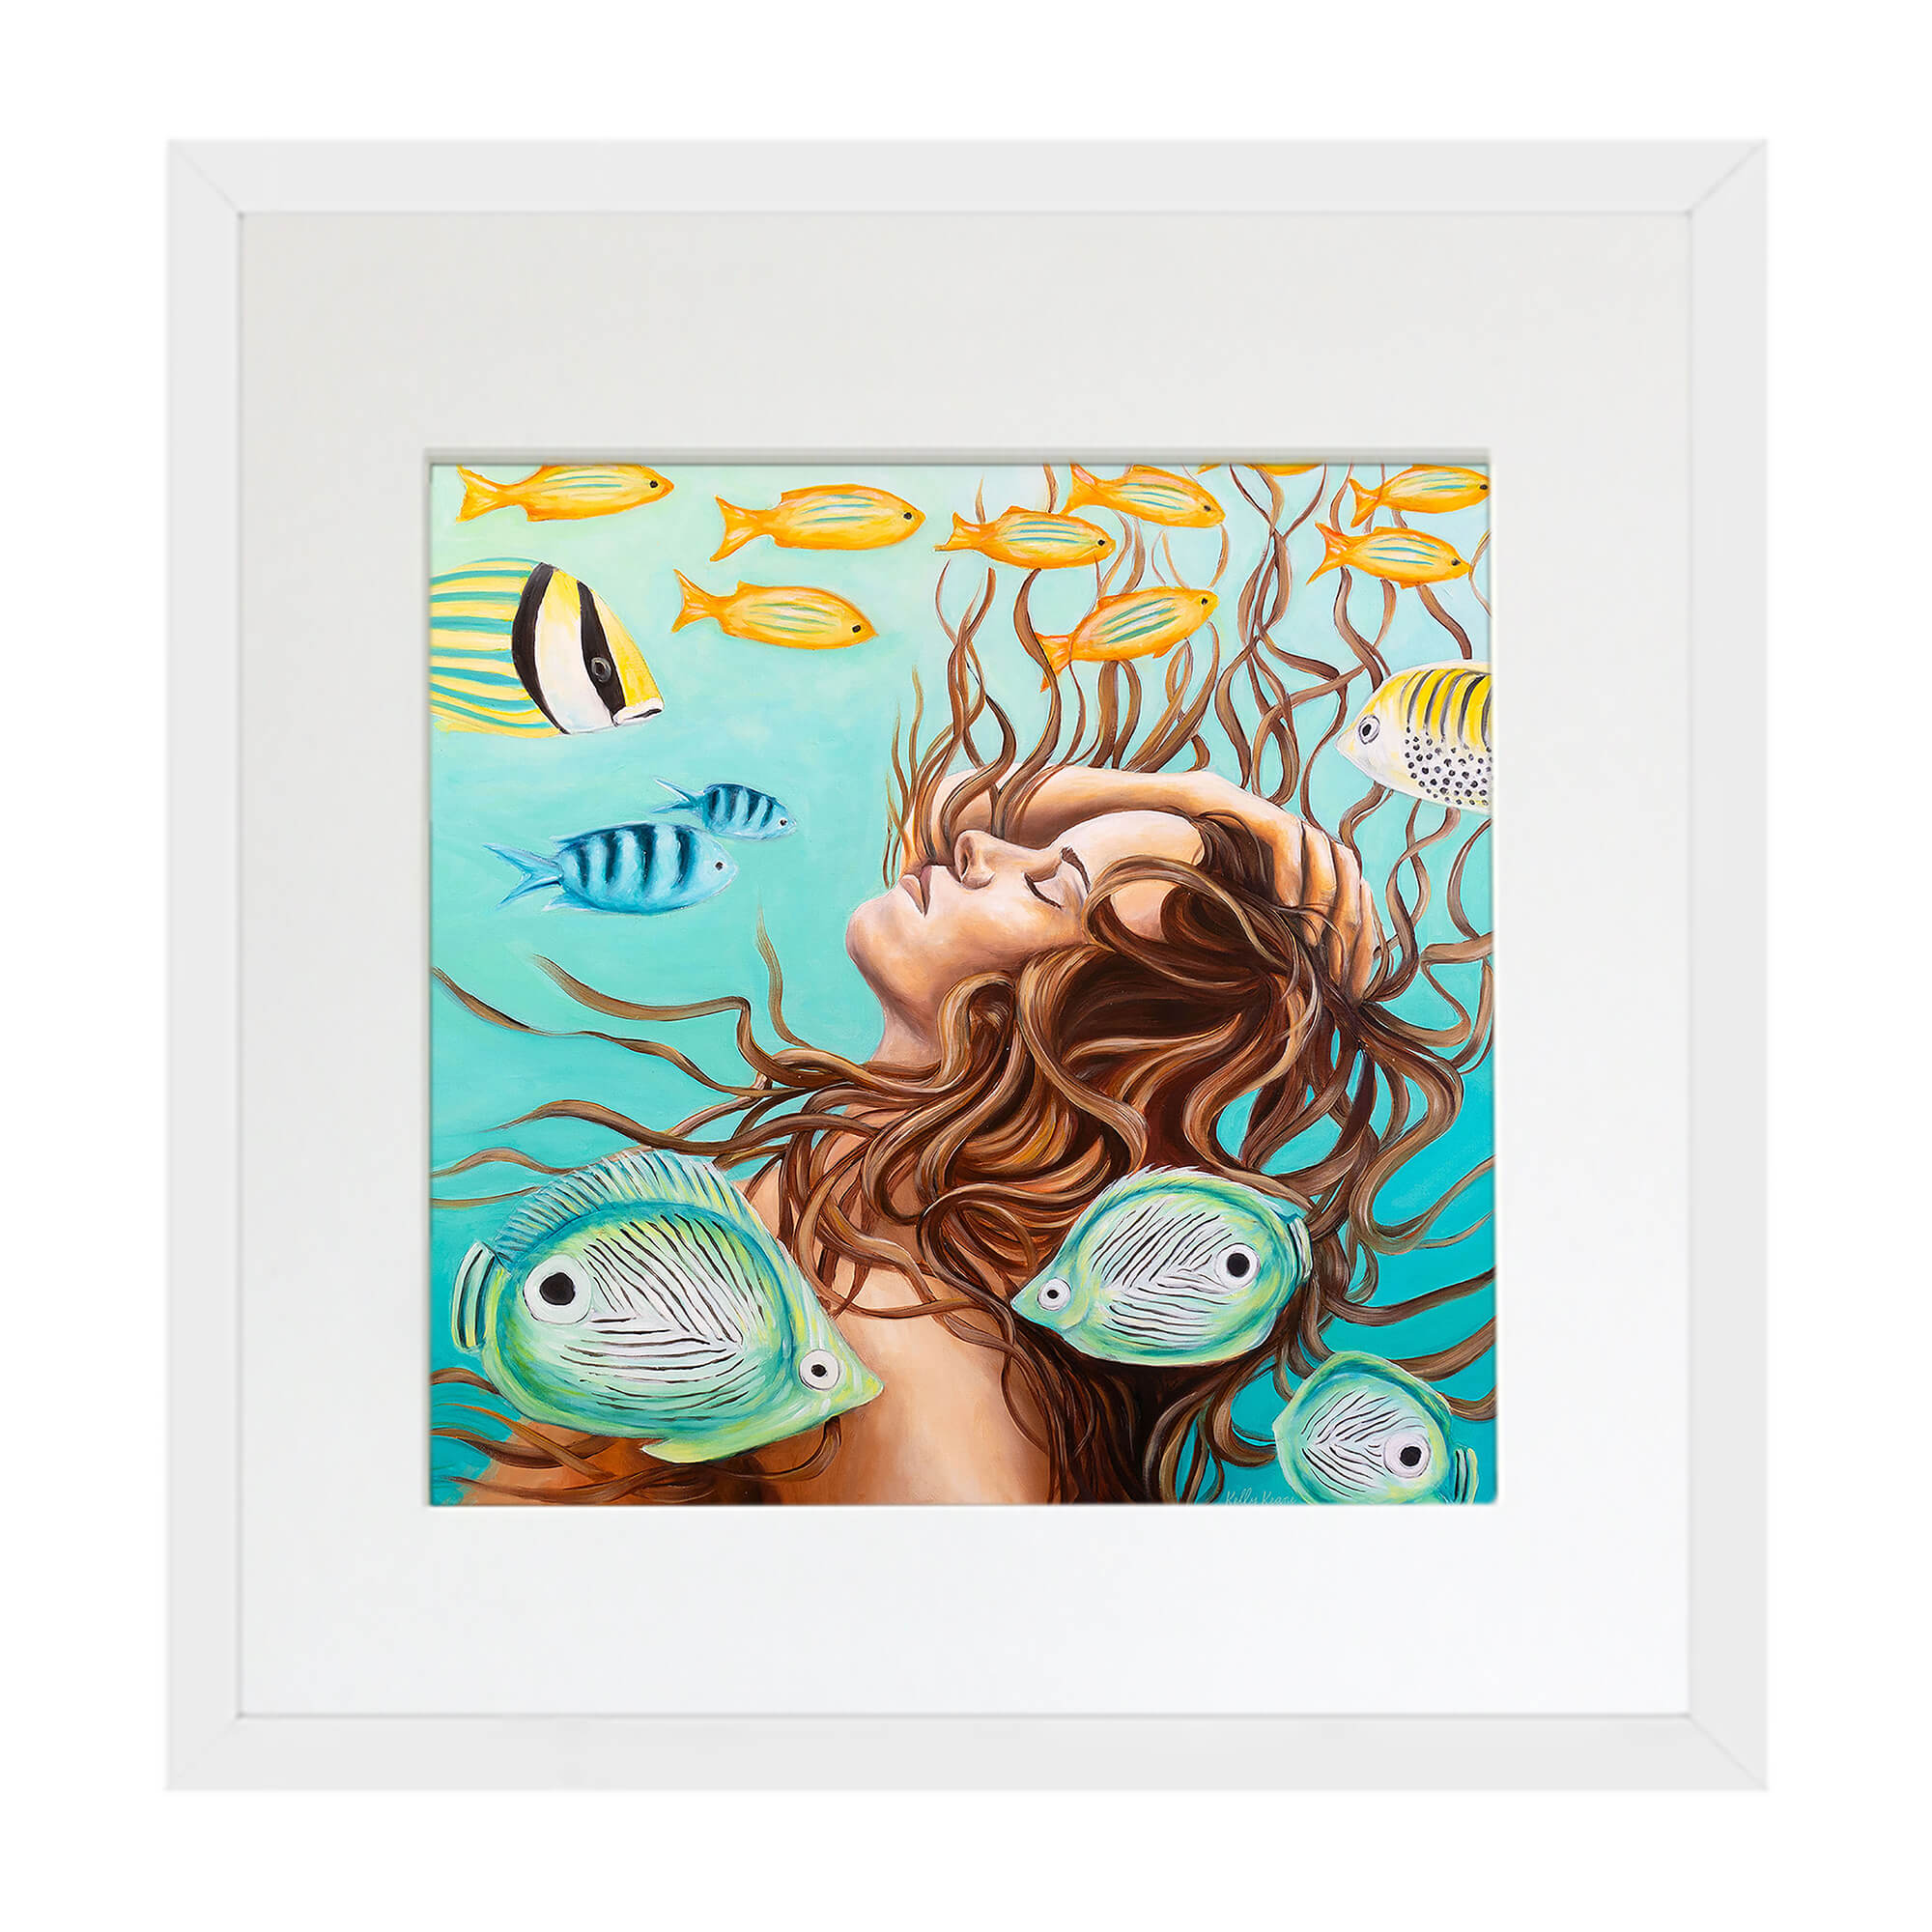 Matted art print of a woman in a crystal-clear water by Hawaii artist Kelly Keane